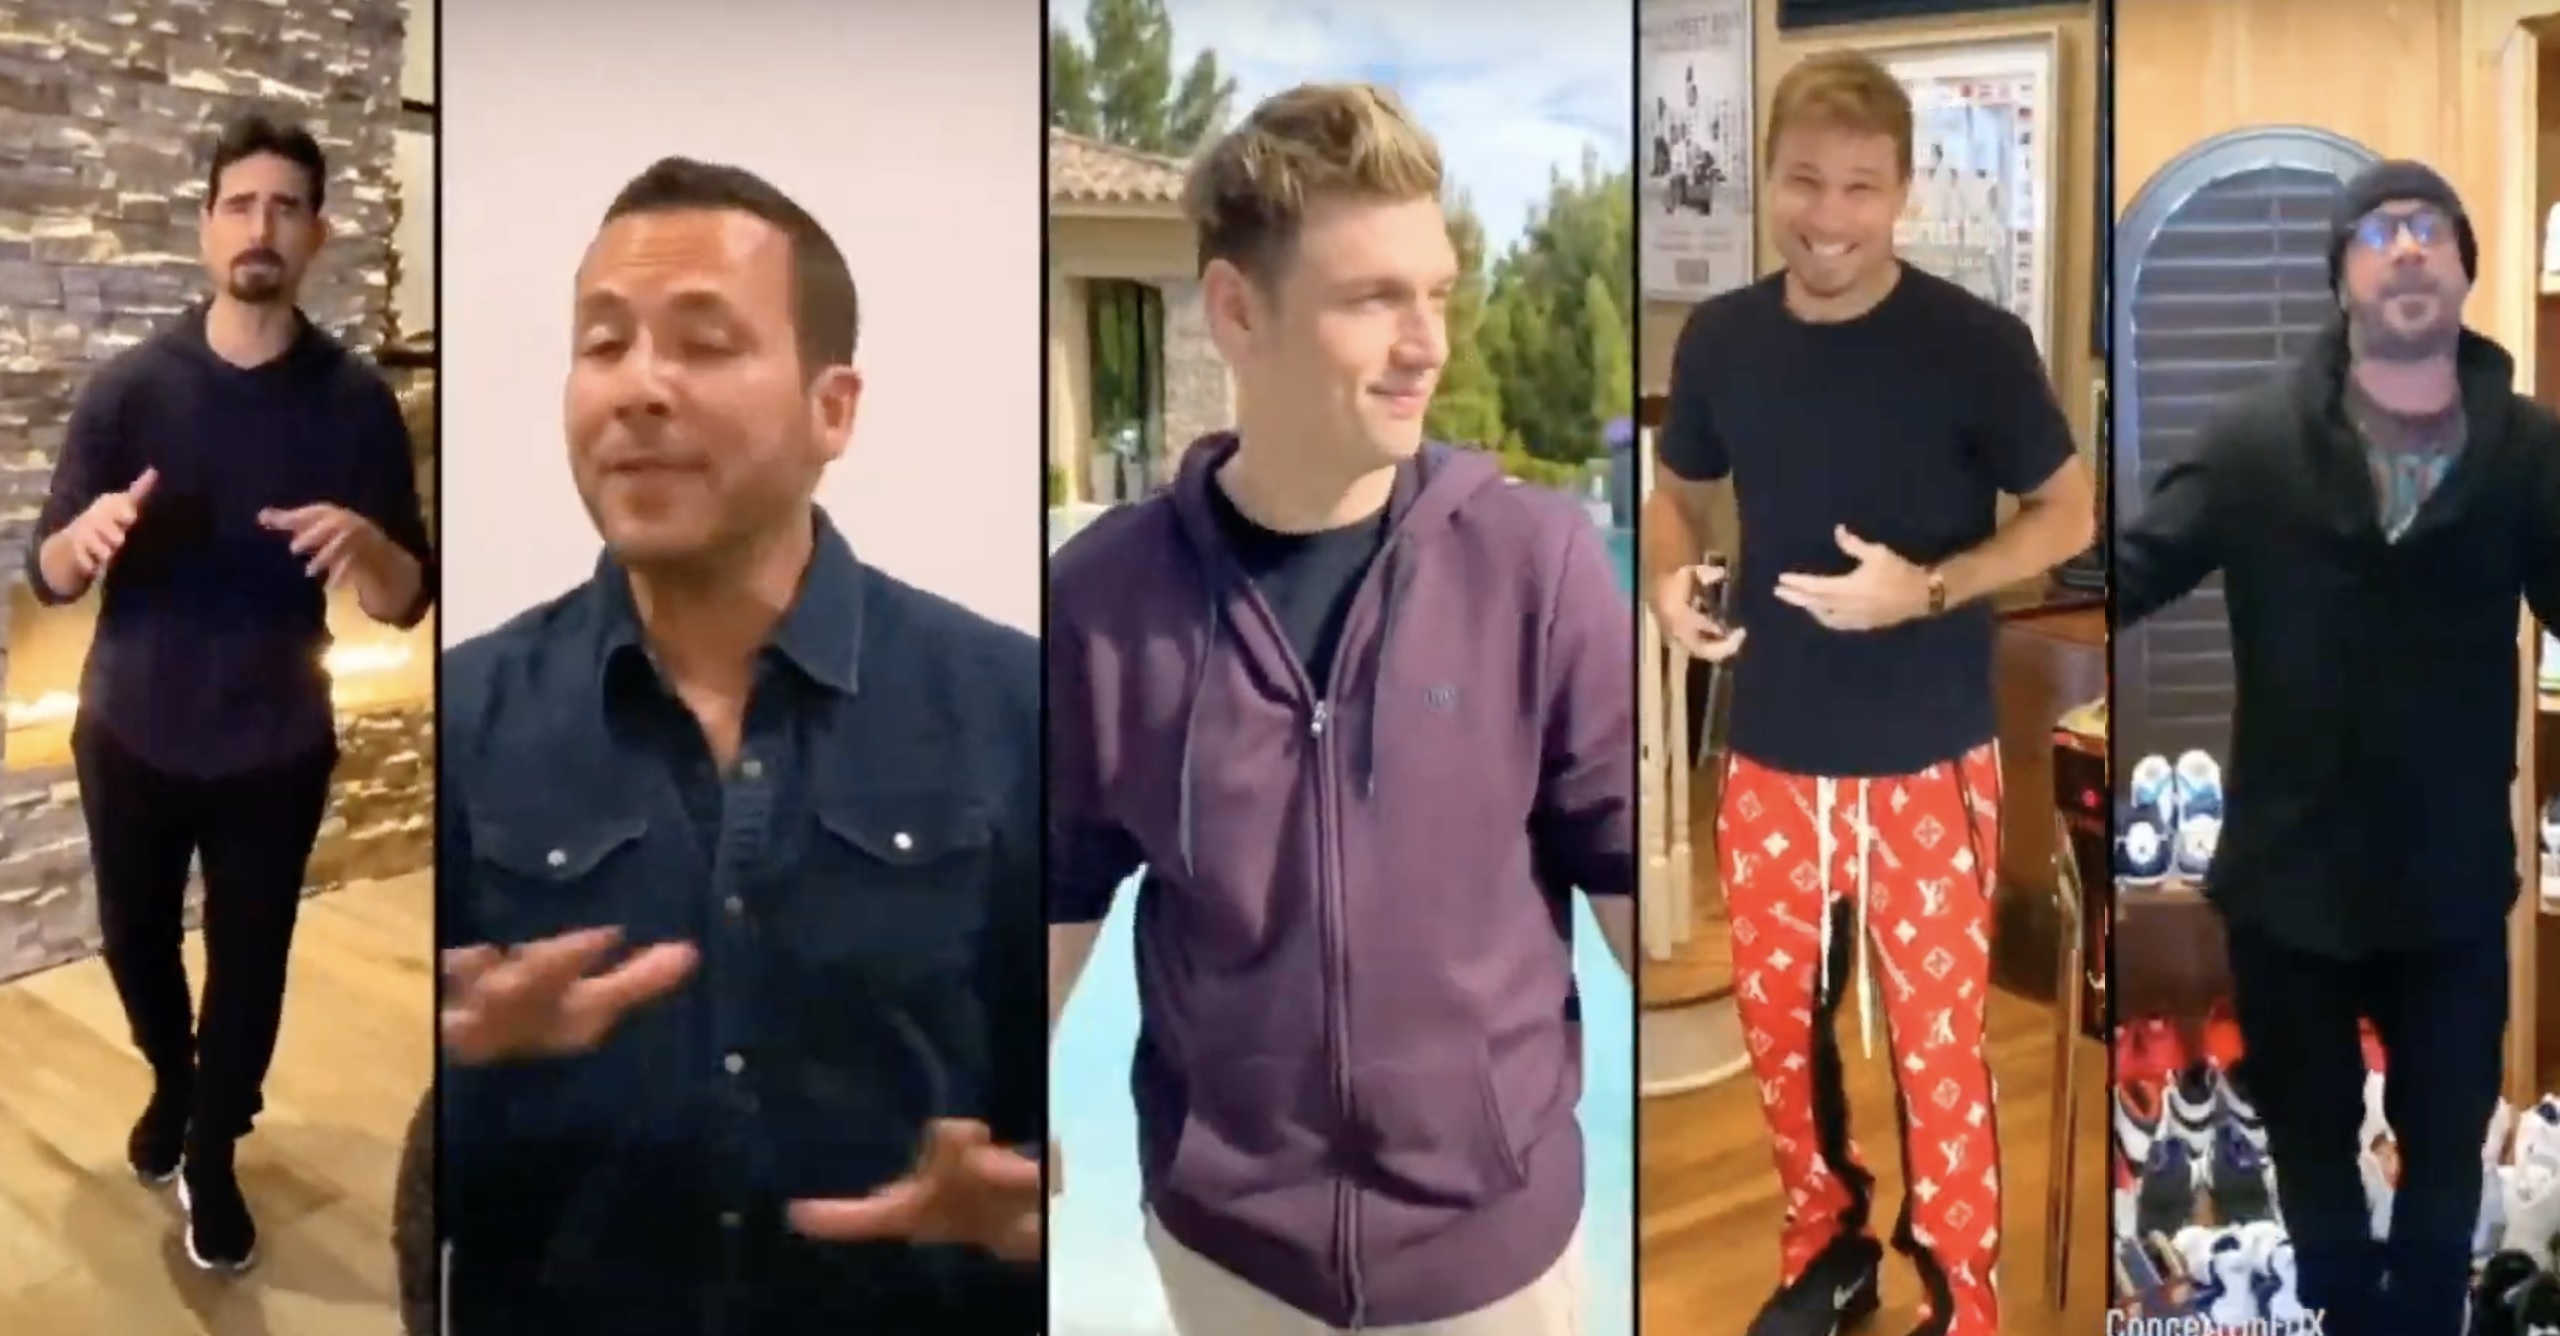 Watch: All the Boys From Backstreet Boys Perform “I Want It That Way” From Self-Quarantine